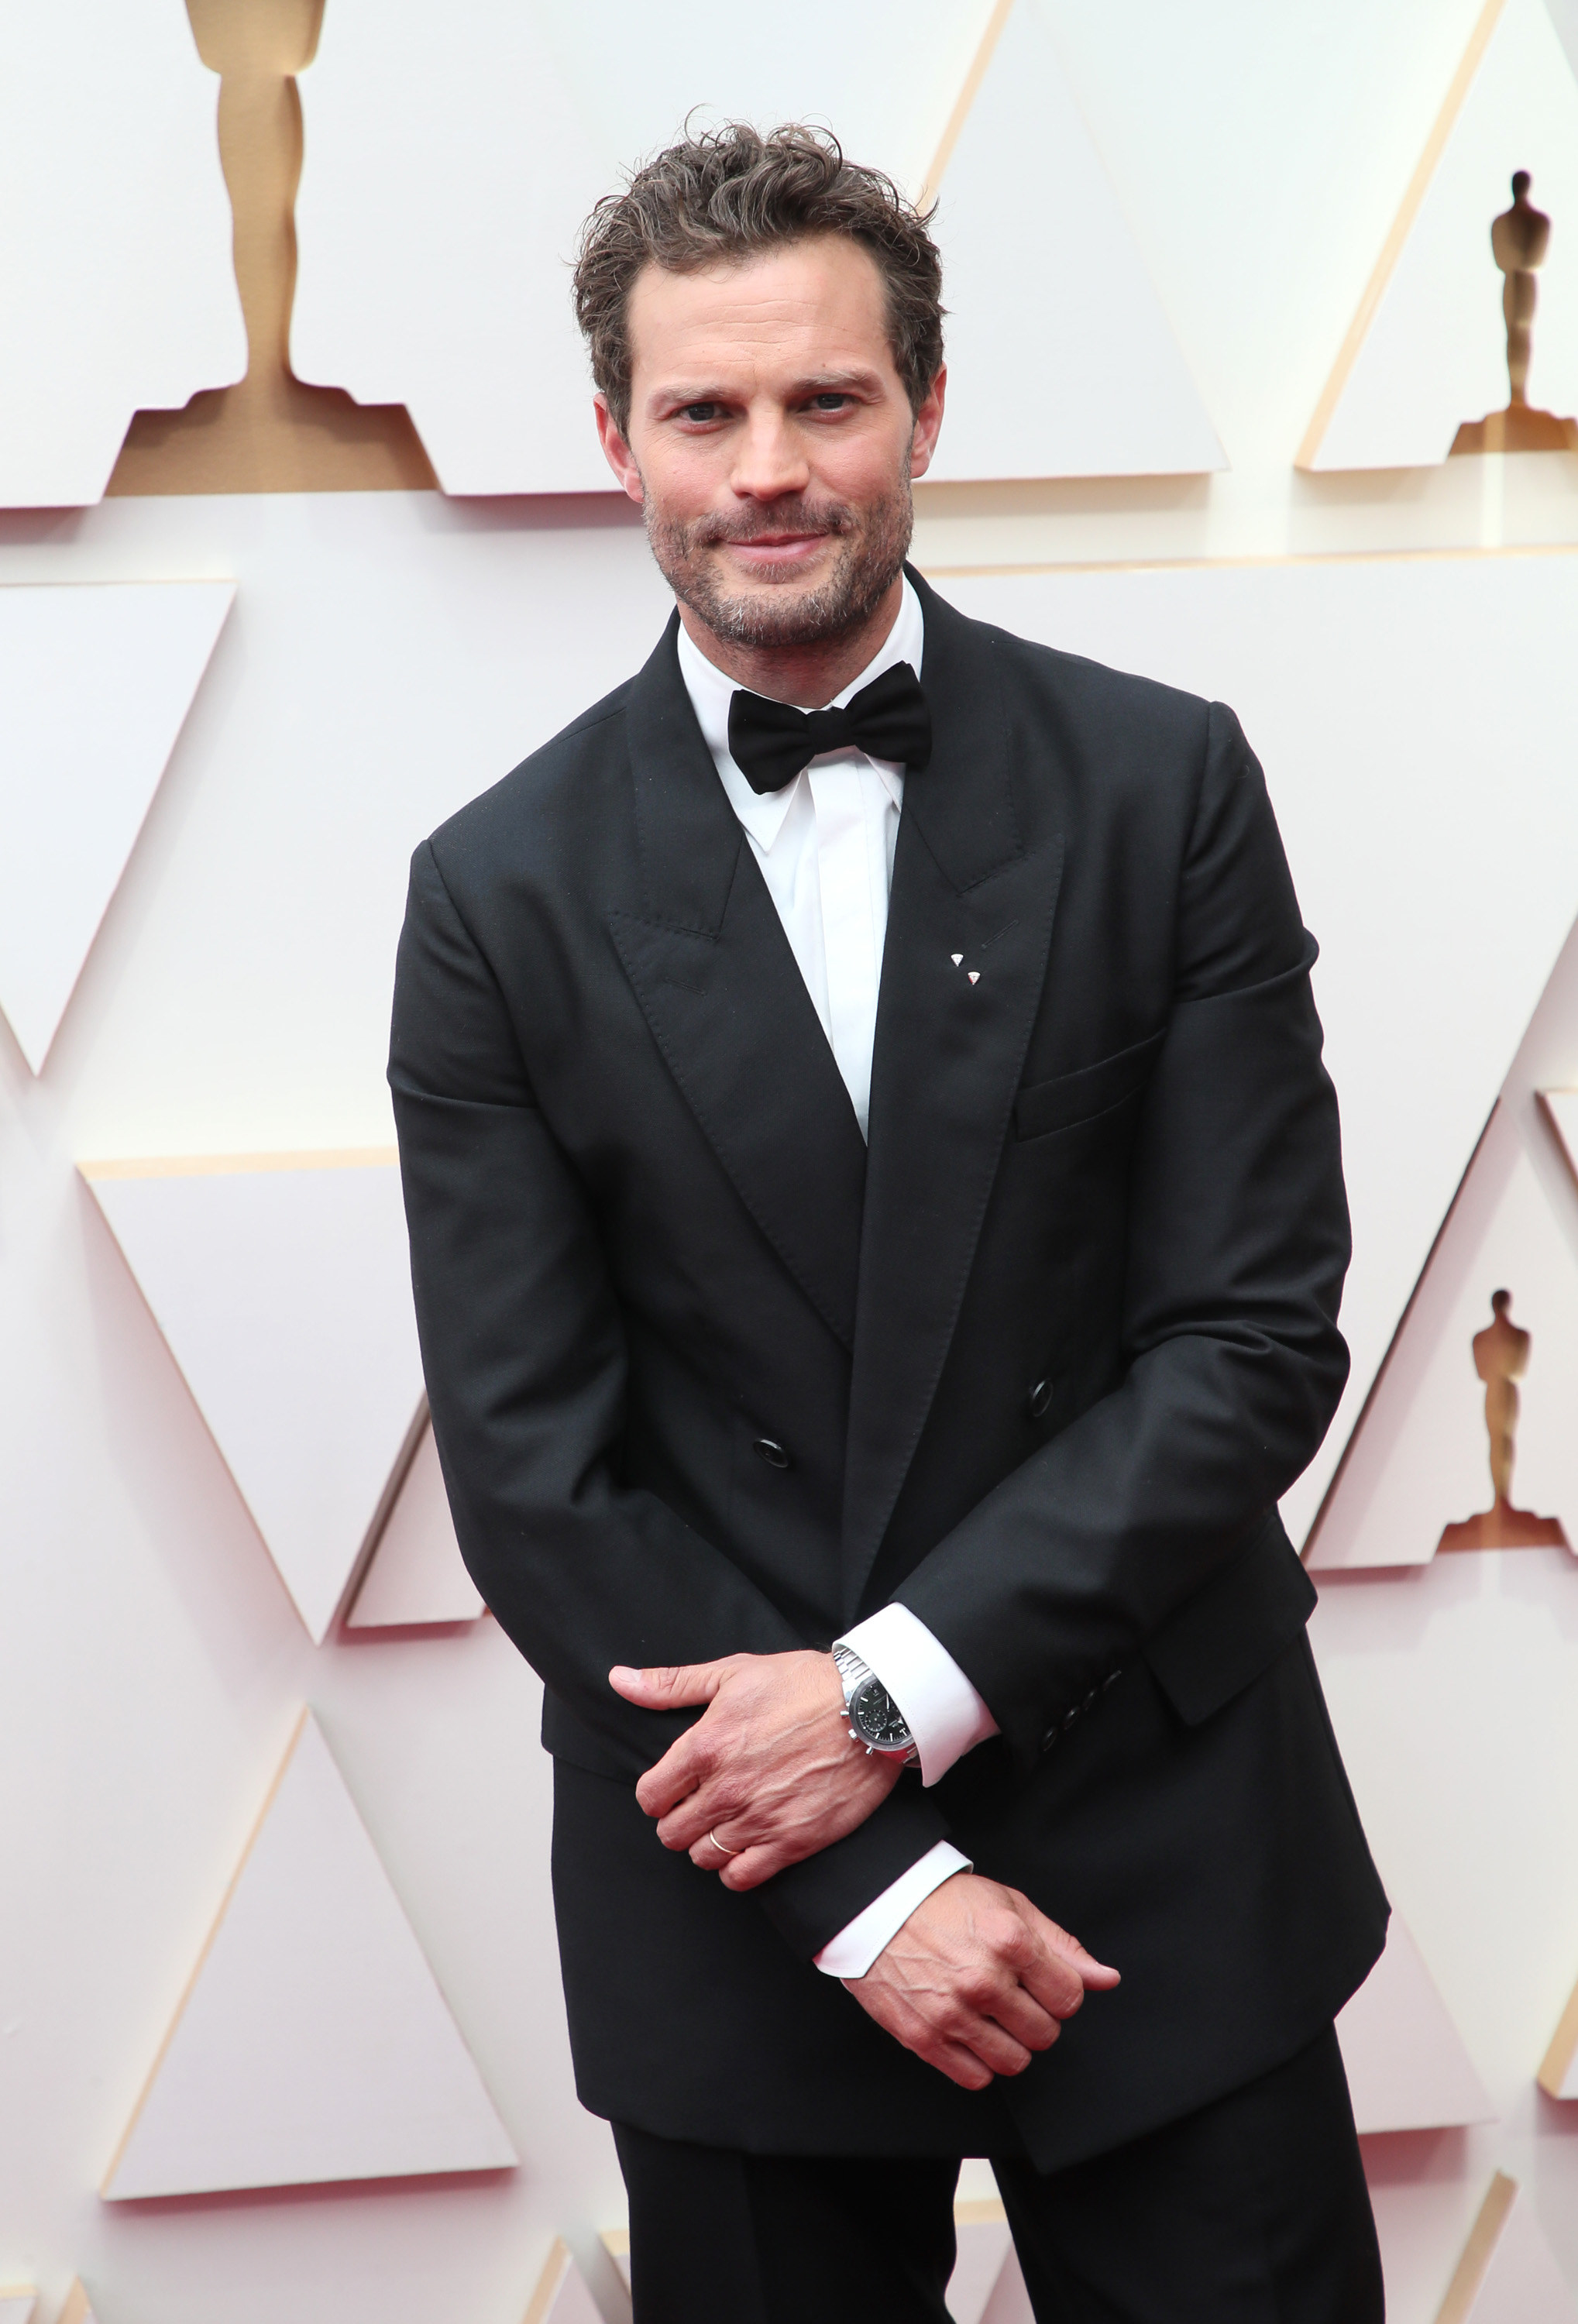 Dornan wearing a suit on the red carpet